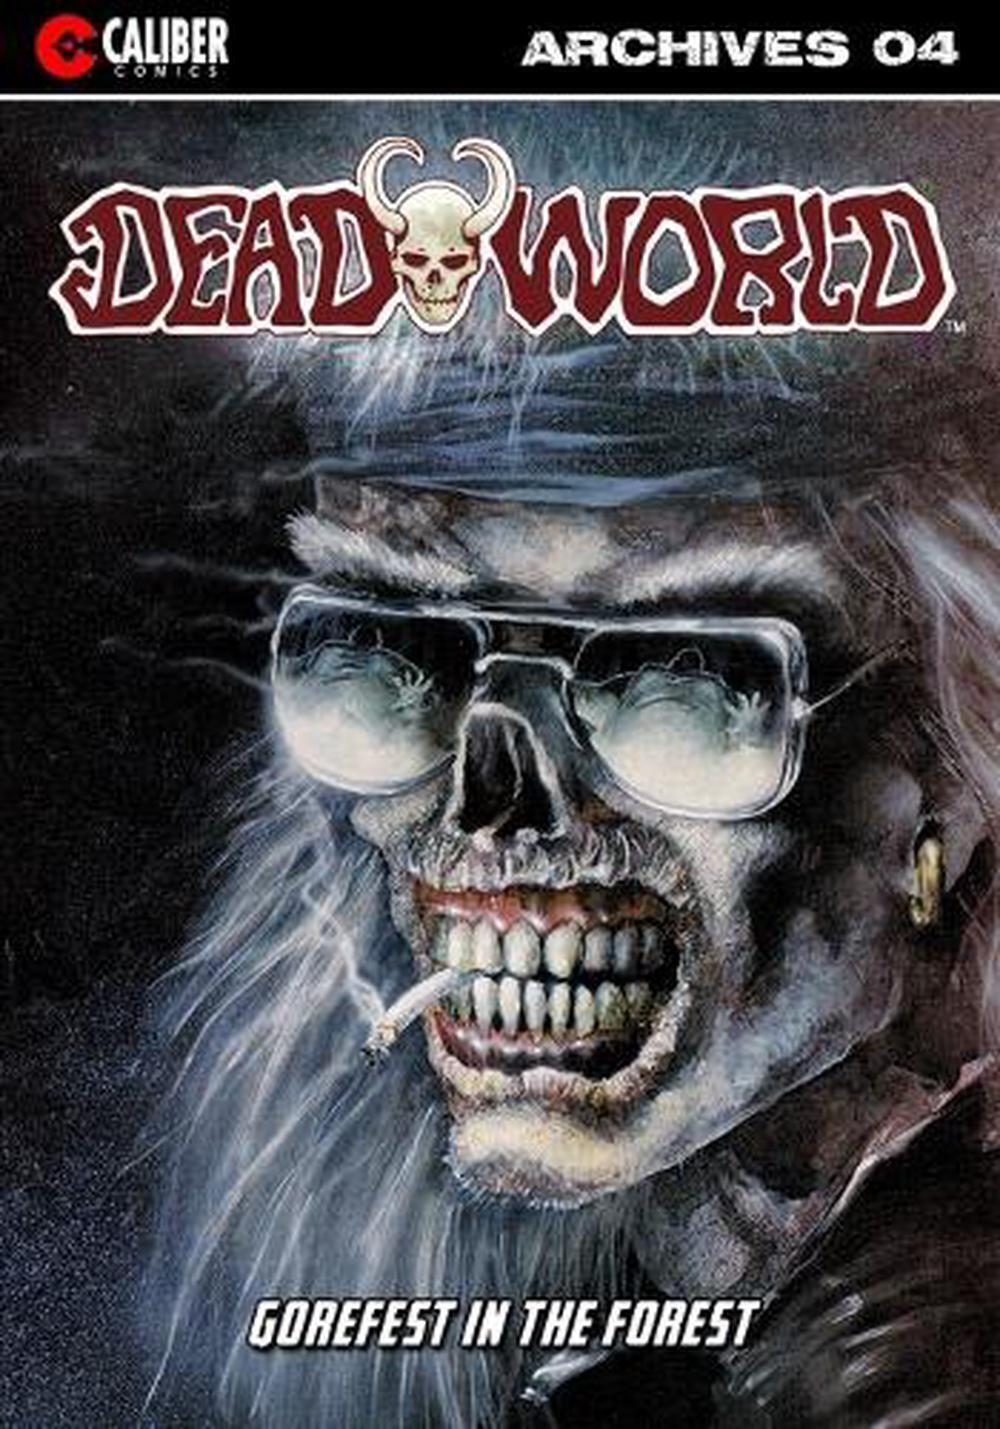 Deadworld Archives: Book Four by Mark Bloodworth (English) Paperback Book